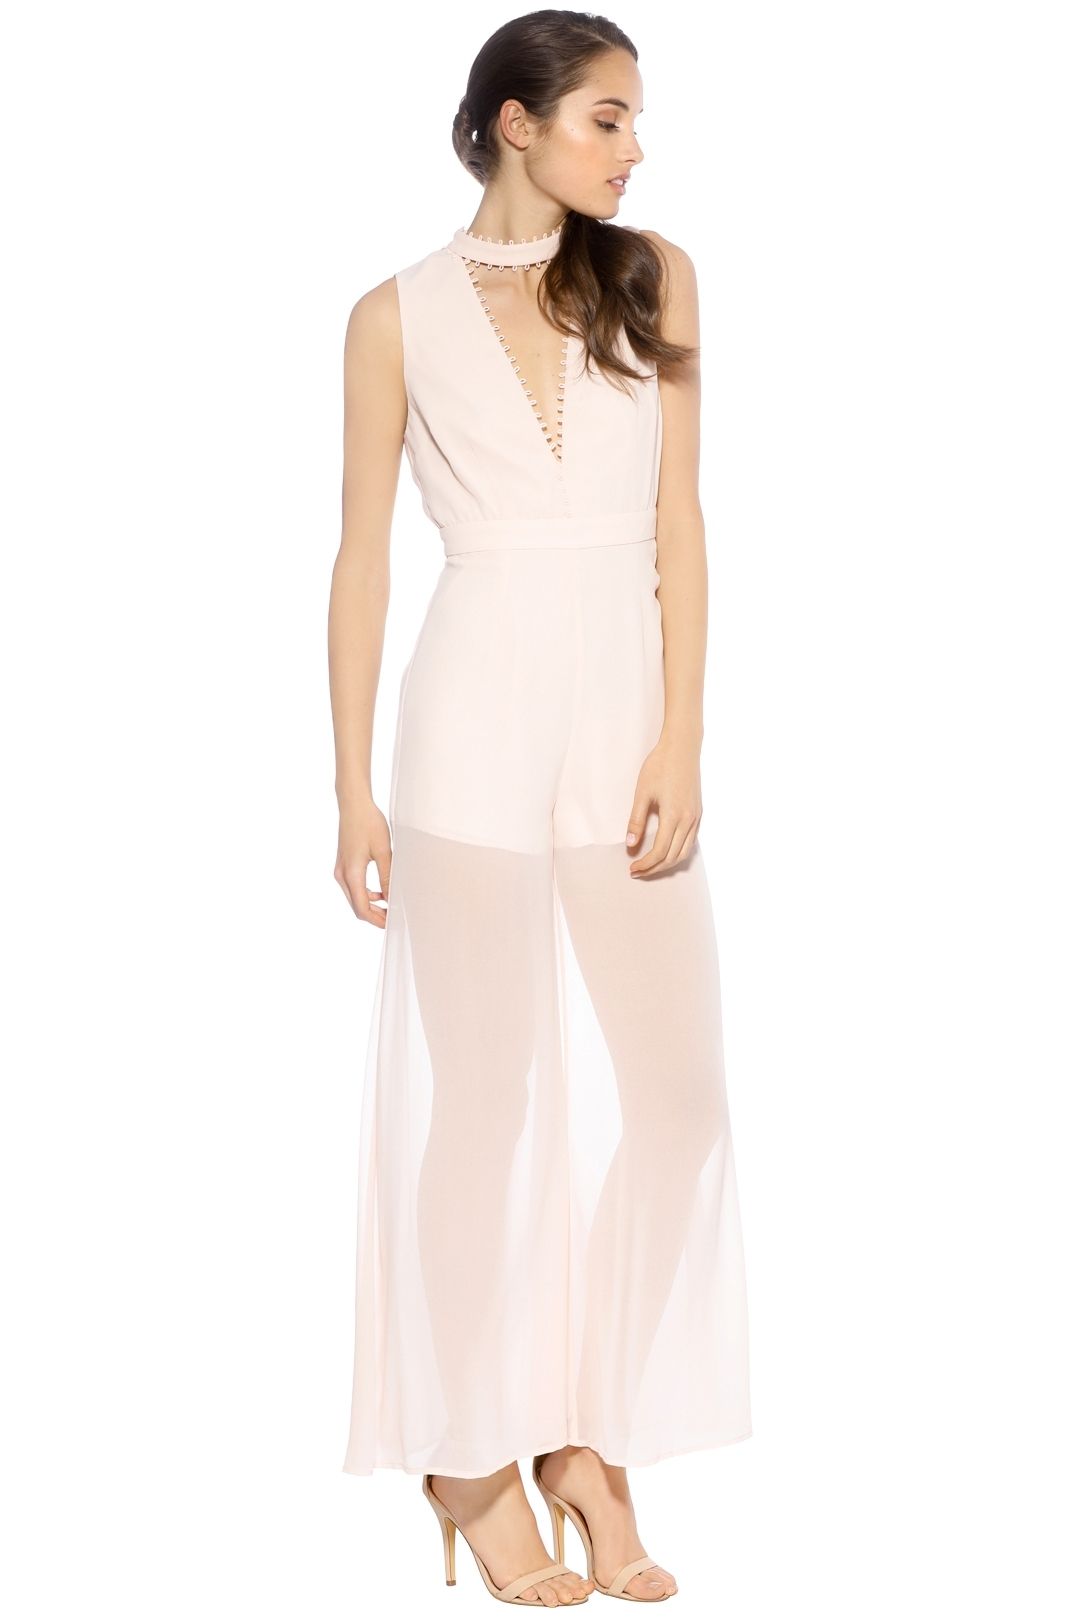 Keepsake The Label - Come Around Jumpsuit Shell - Pink - Side